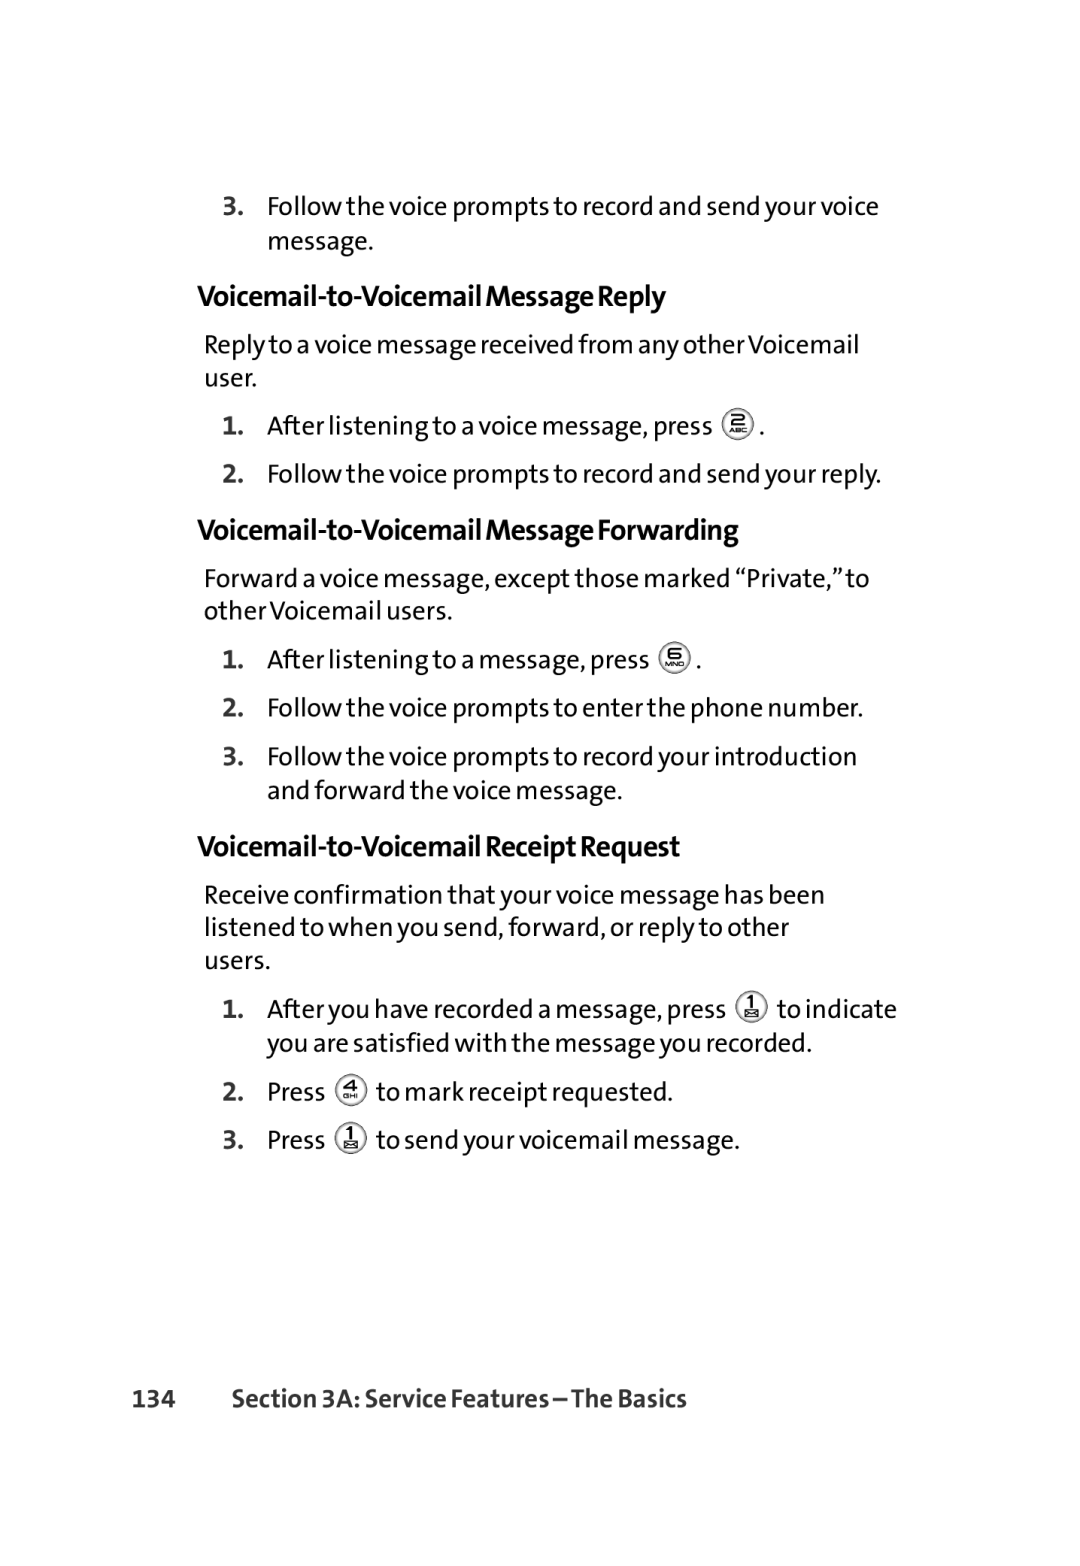 LG Electronics 350 manual Voicemail-to-VoicemailMessageReply, Voicemail-to-VoicemailMessageForwarding 